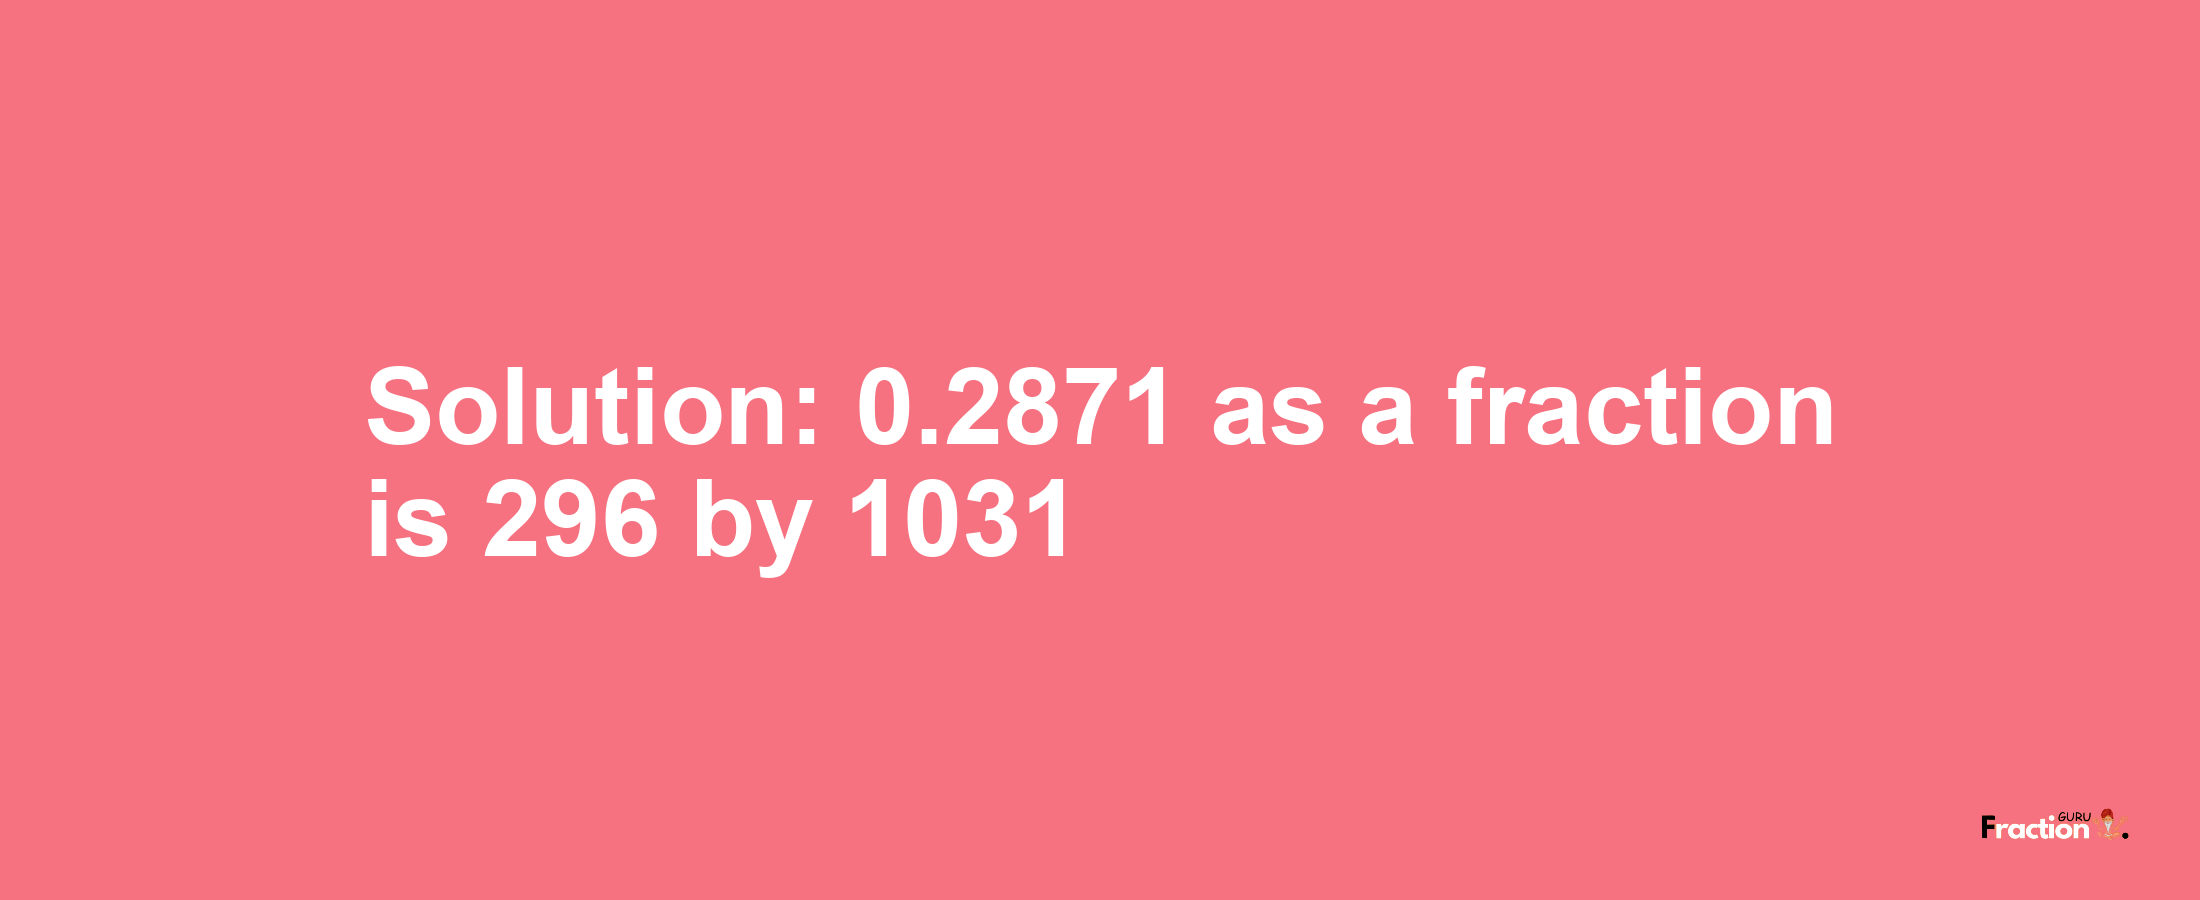 Solution:0.2871 as a fraction is 296/1031